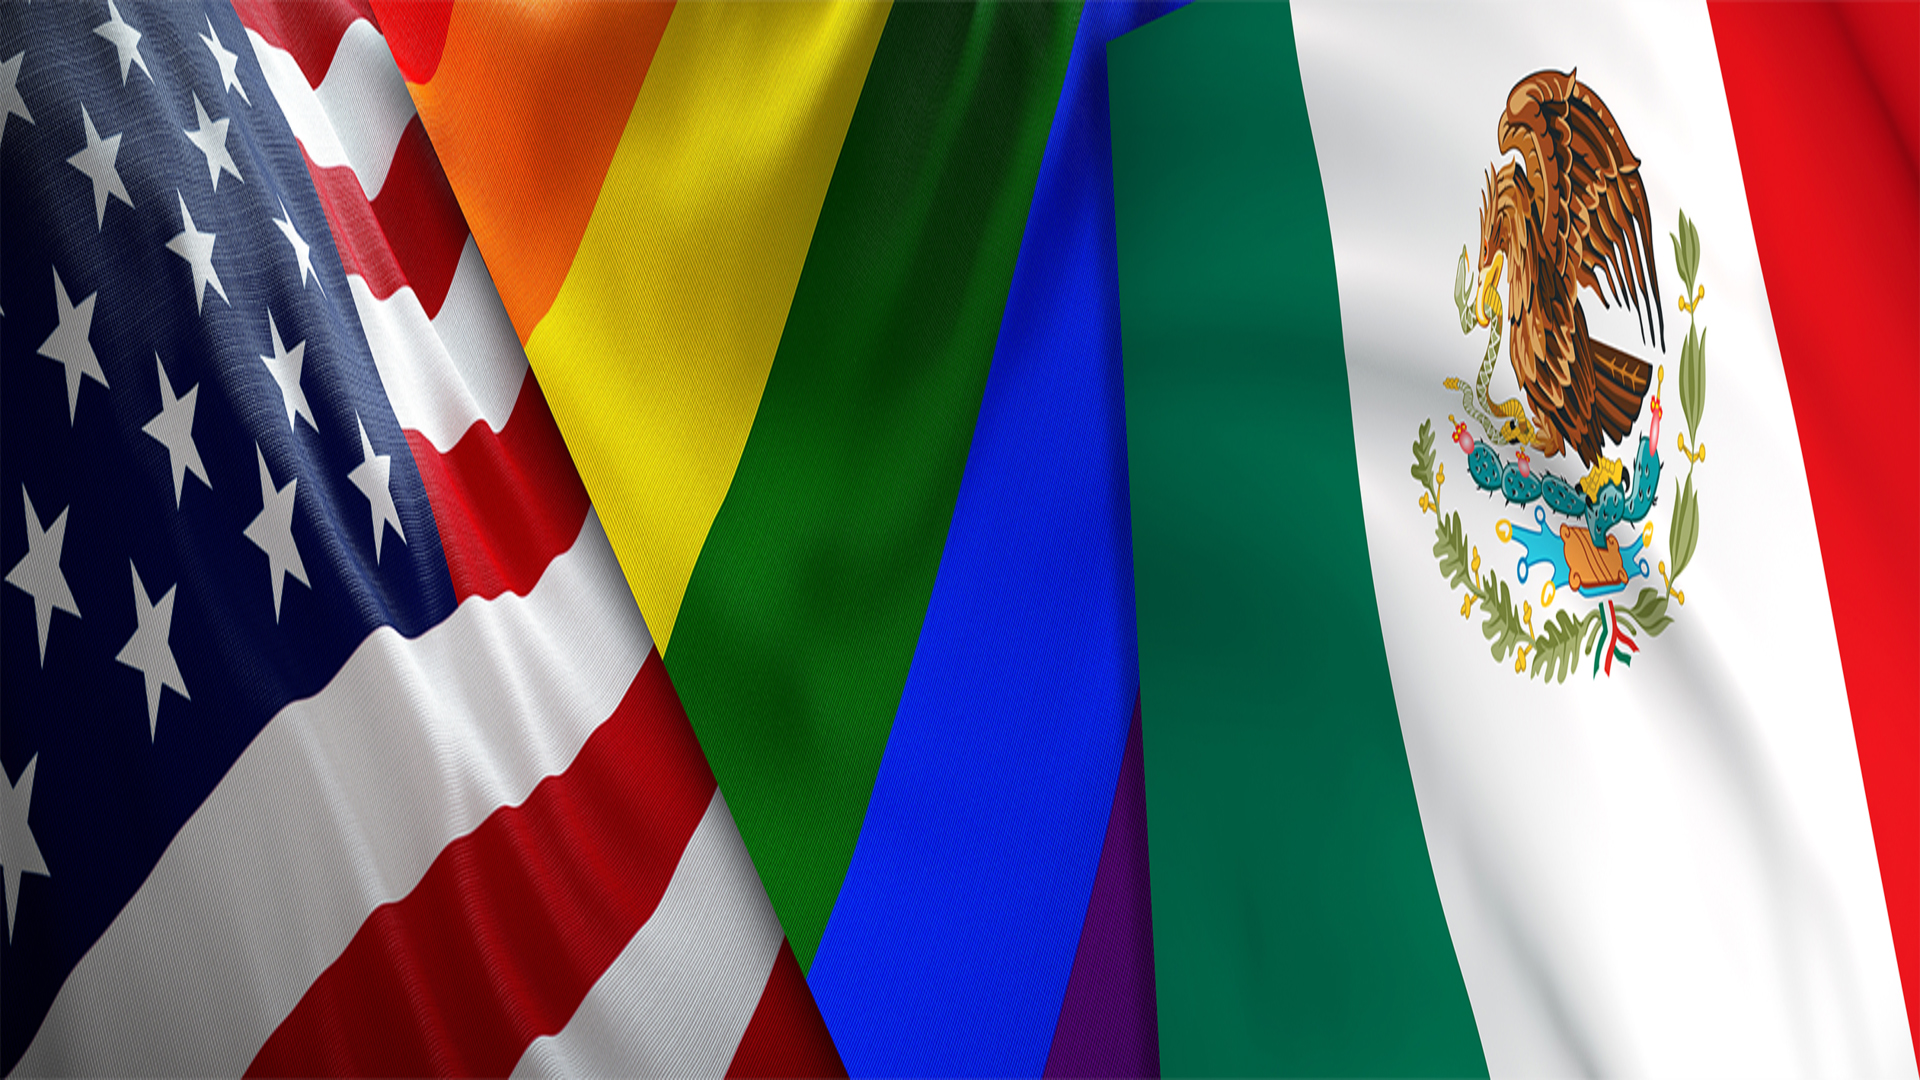 United States, Pride, and Mexico Flag overlapping each other in an image.